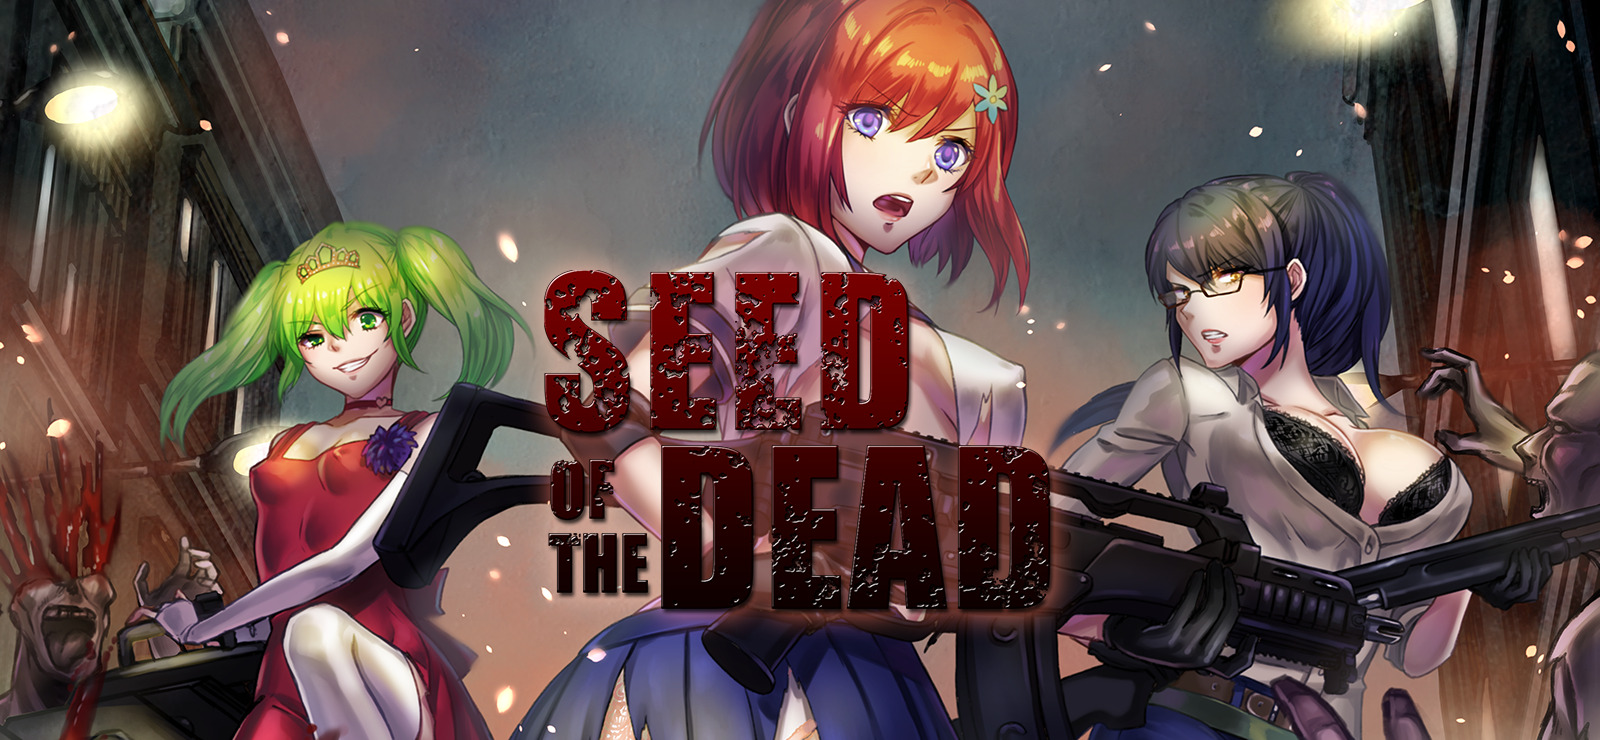 britney richards recommends Seed Of The Dead Uncensored